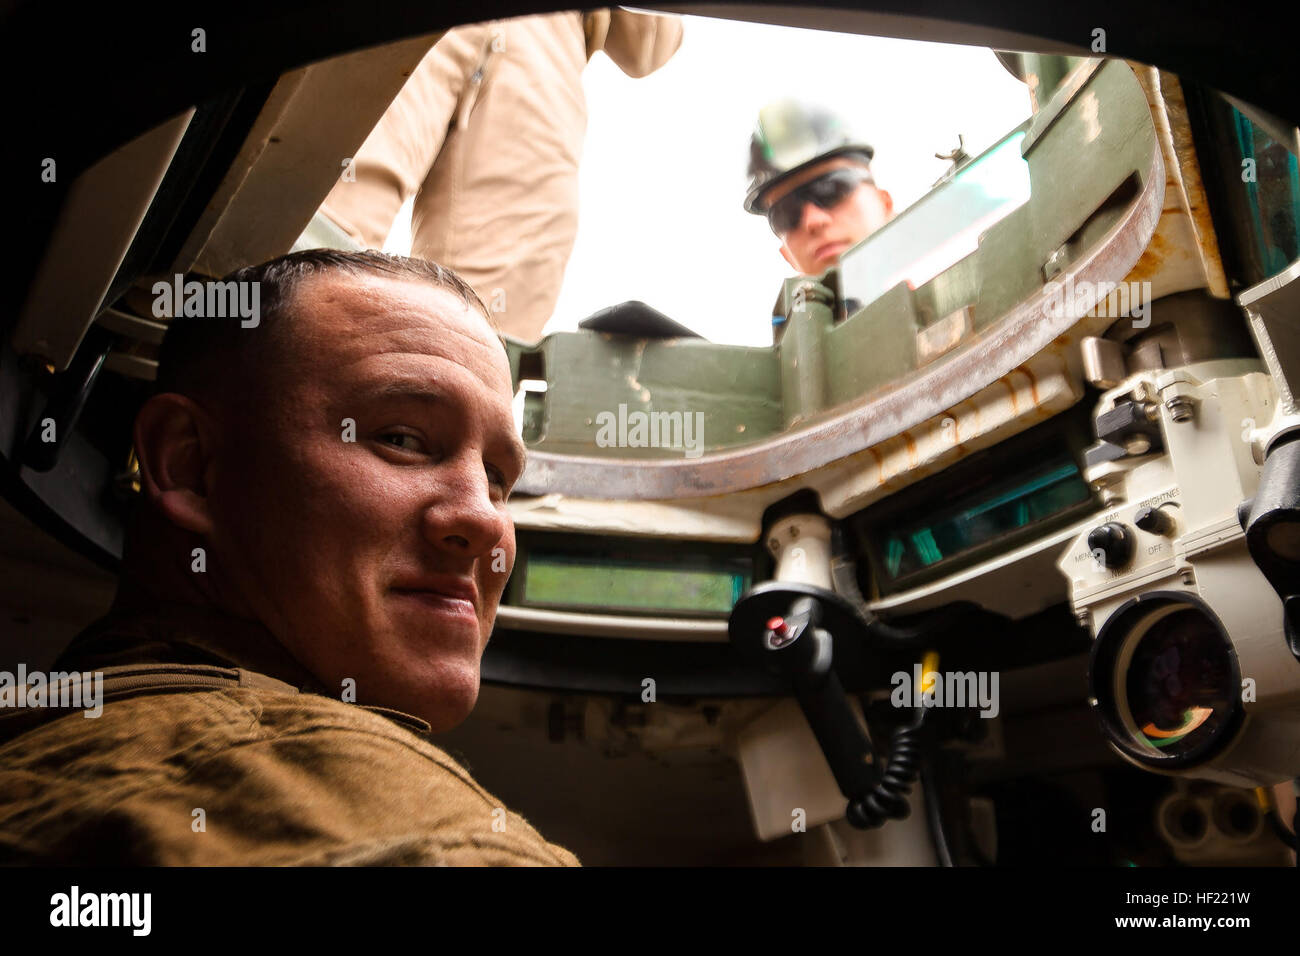 U.S. Marine Corps Sgt. Robert Cornett, a vehicle commander, 2nd Tank Battalion, 2nd Marine Division, prepares to unload a M88 A2 Hercules Recovery Vehicle from a railcar during a Deployment for Training (DFT) Exercise at Fort Pickett, Va., March 28, 2014. The DFT is conducted to strengthen the unit's proficiency in a combat environment.  (U.S. Marine Corps photo by Lance Cpl. Kelly Timney, 2nd MarDiv, Combat Camera/Released) 2nd Tank Battalion Deployment for Training Exercise (DFT) 140328-M-OU200-215 Stock Photo